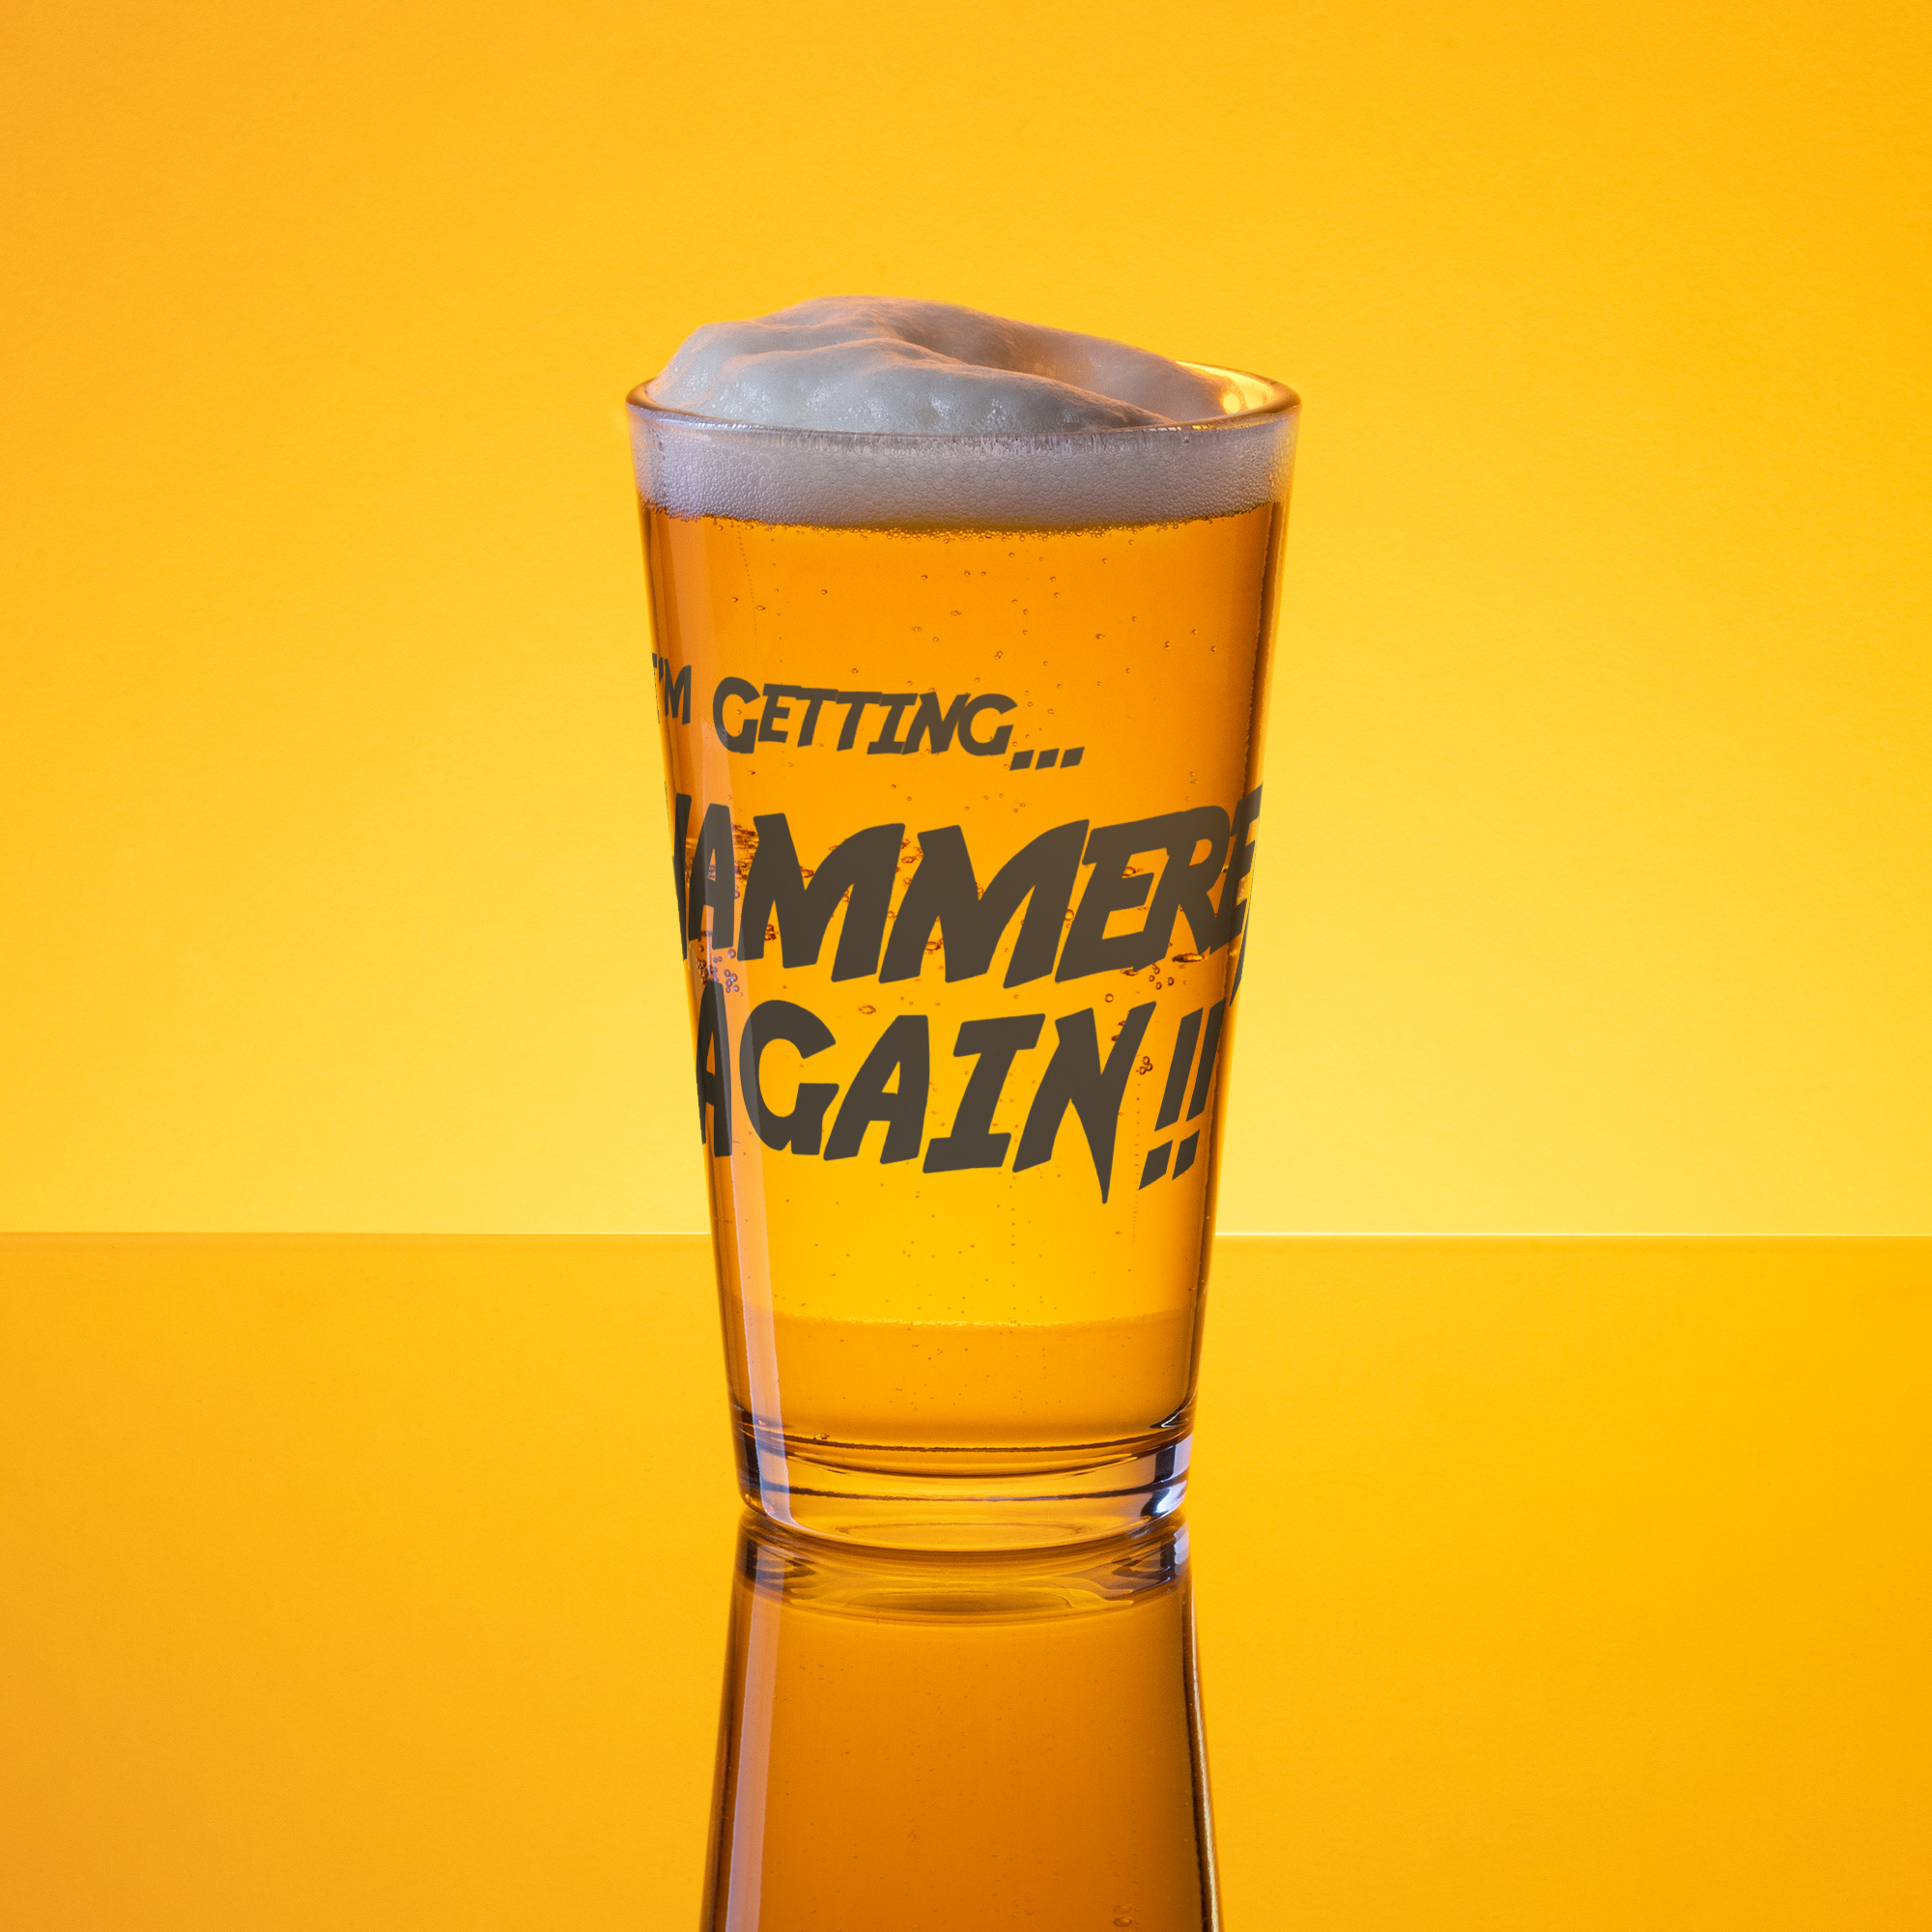 Getting Hammered Again! - Shaker pint glass - Four Wheel Drive ROCK